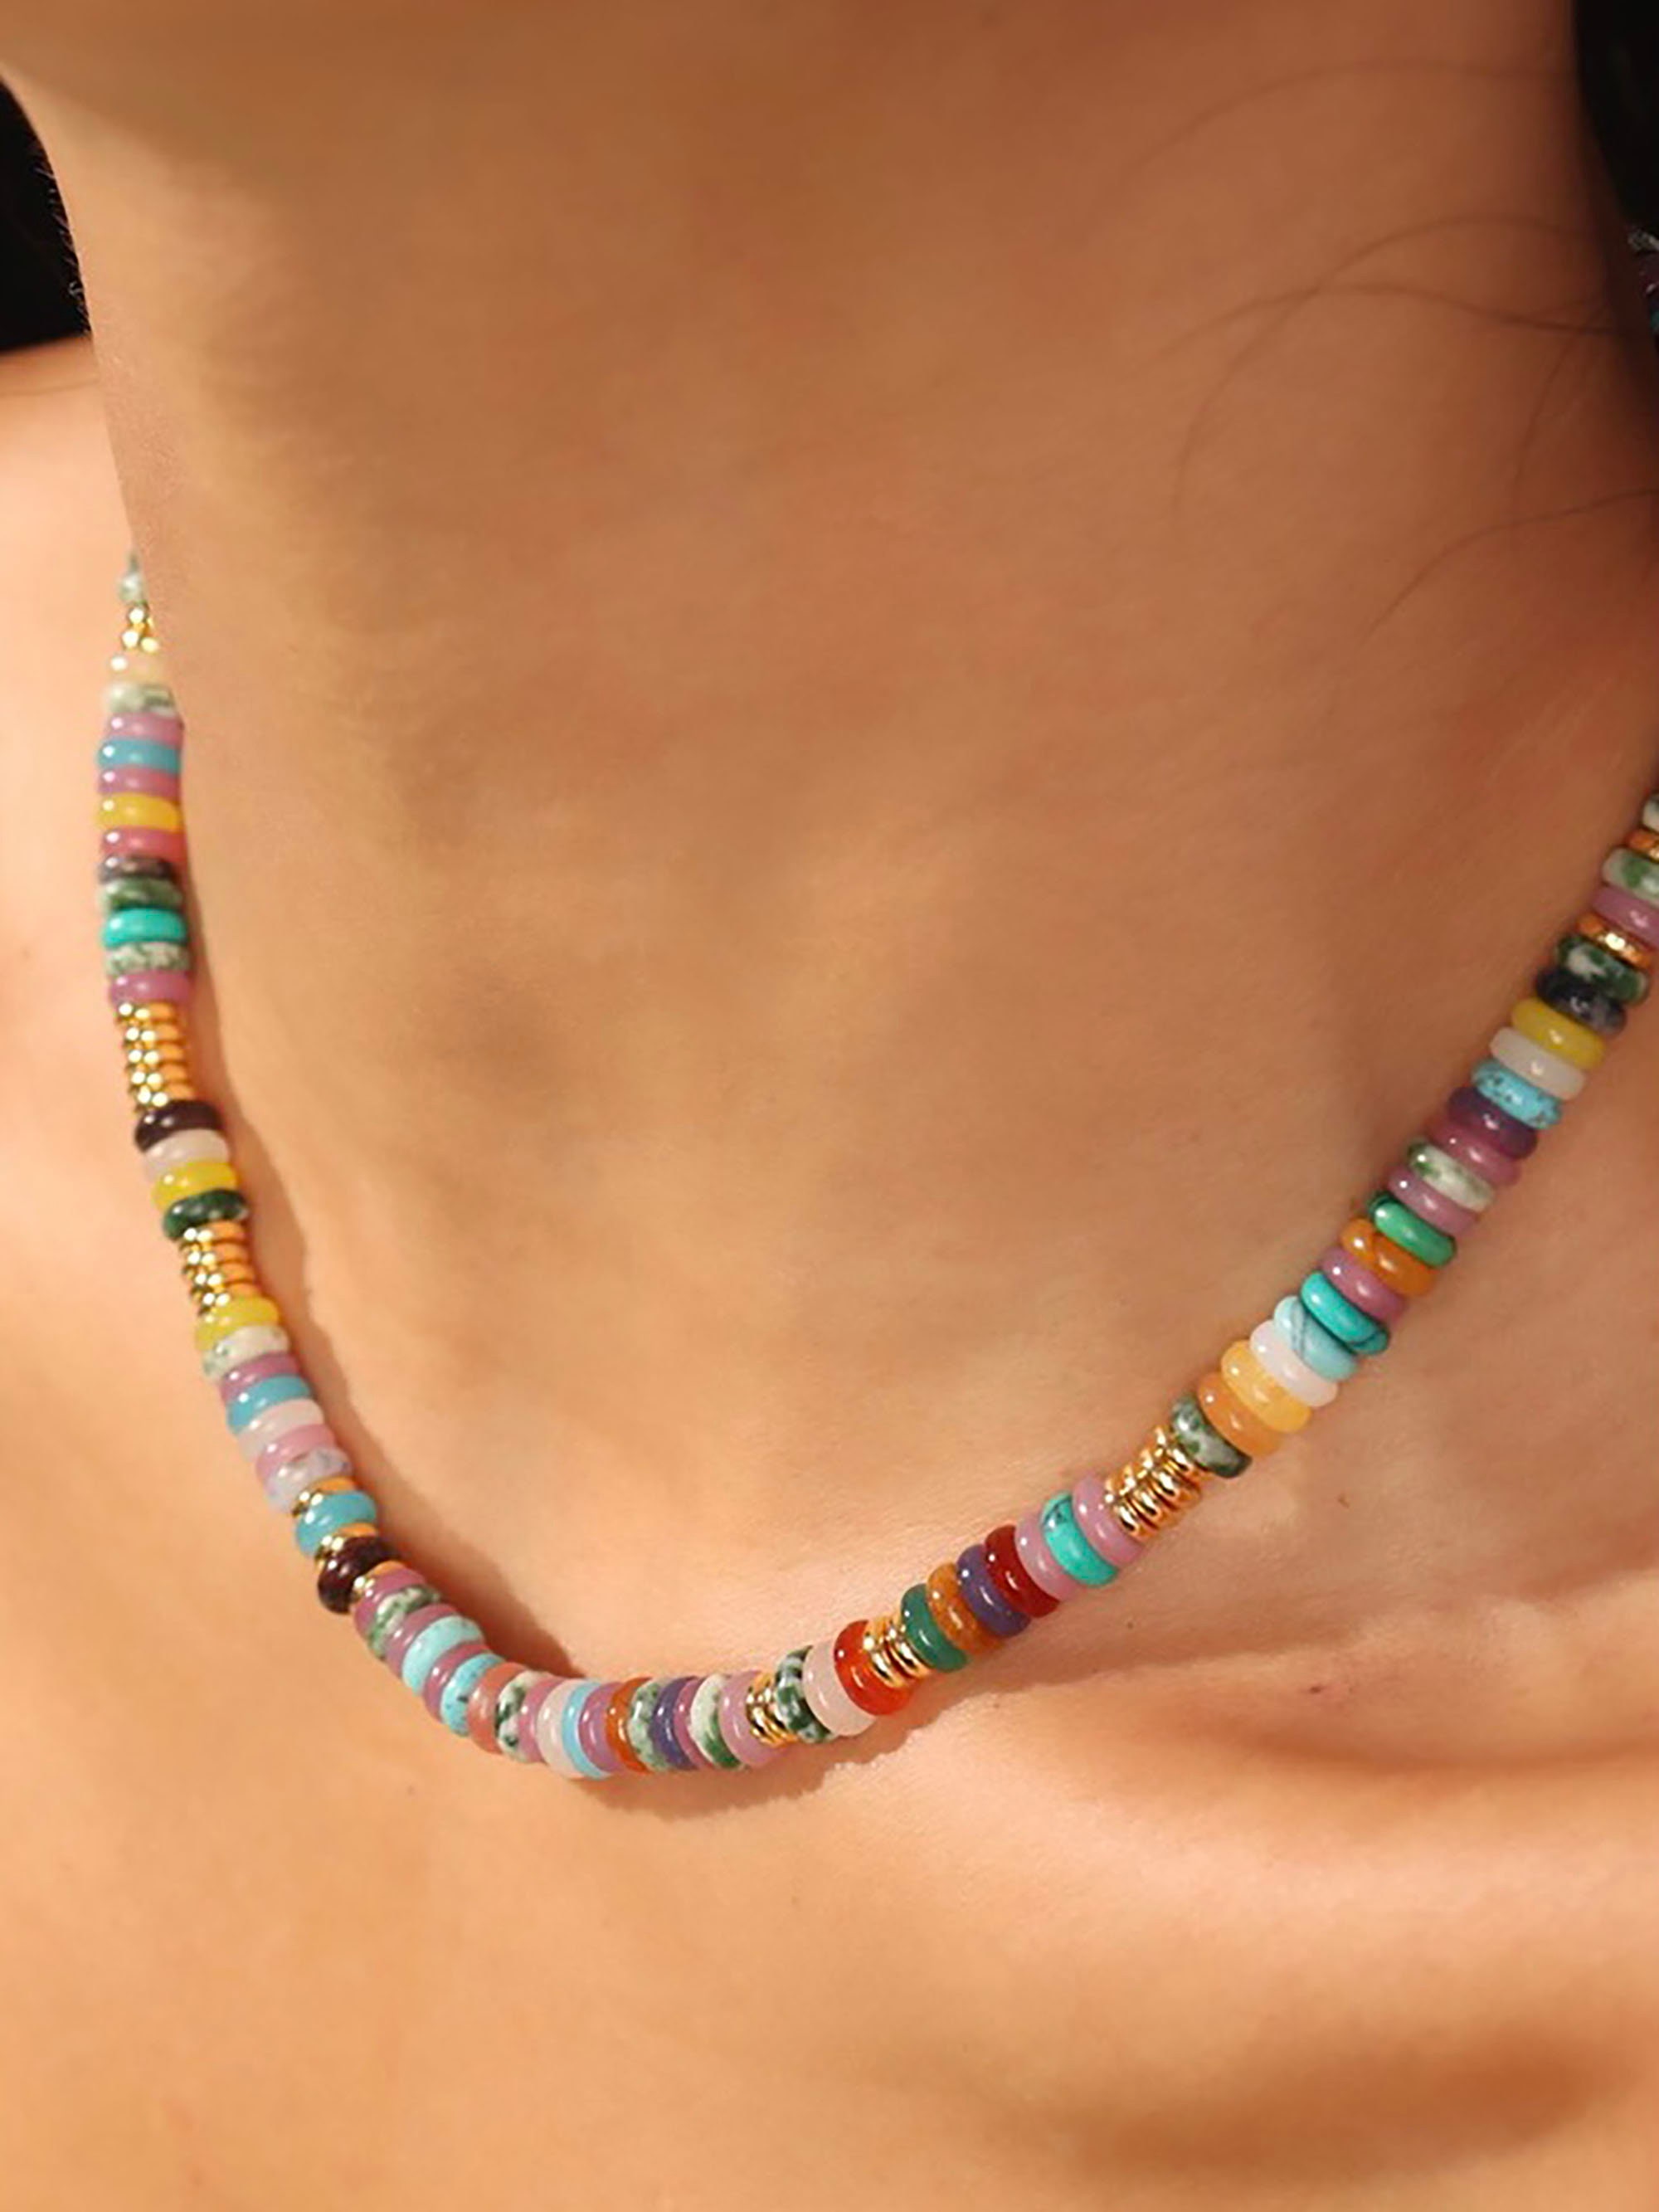 Multi Color Seed Bead Necklace, Hippy Love Beads, Thin 1.5mm Single Strand 35